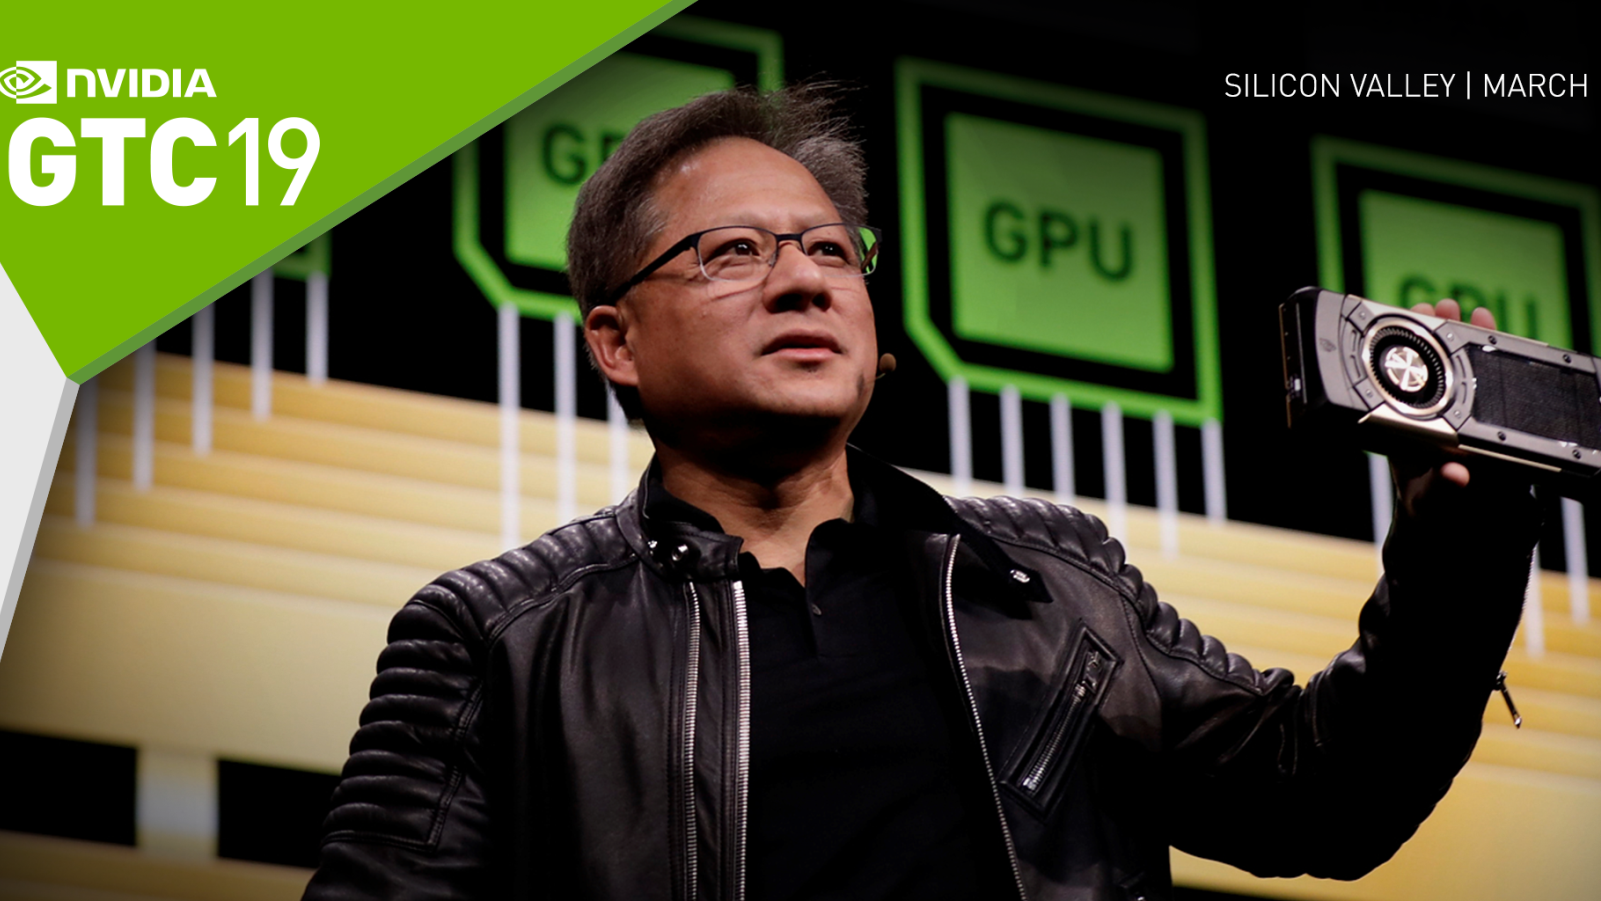 Jensen Huang, founder and CEO of NVIDIA. Photo: courtesy